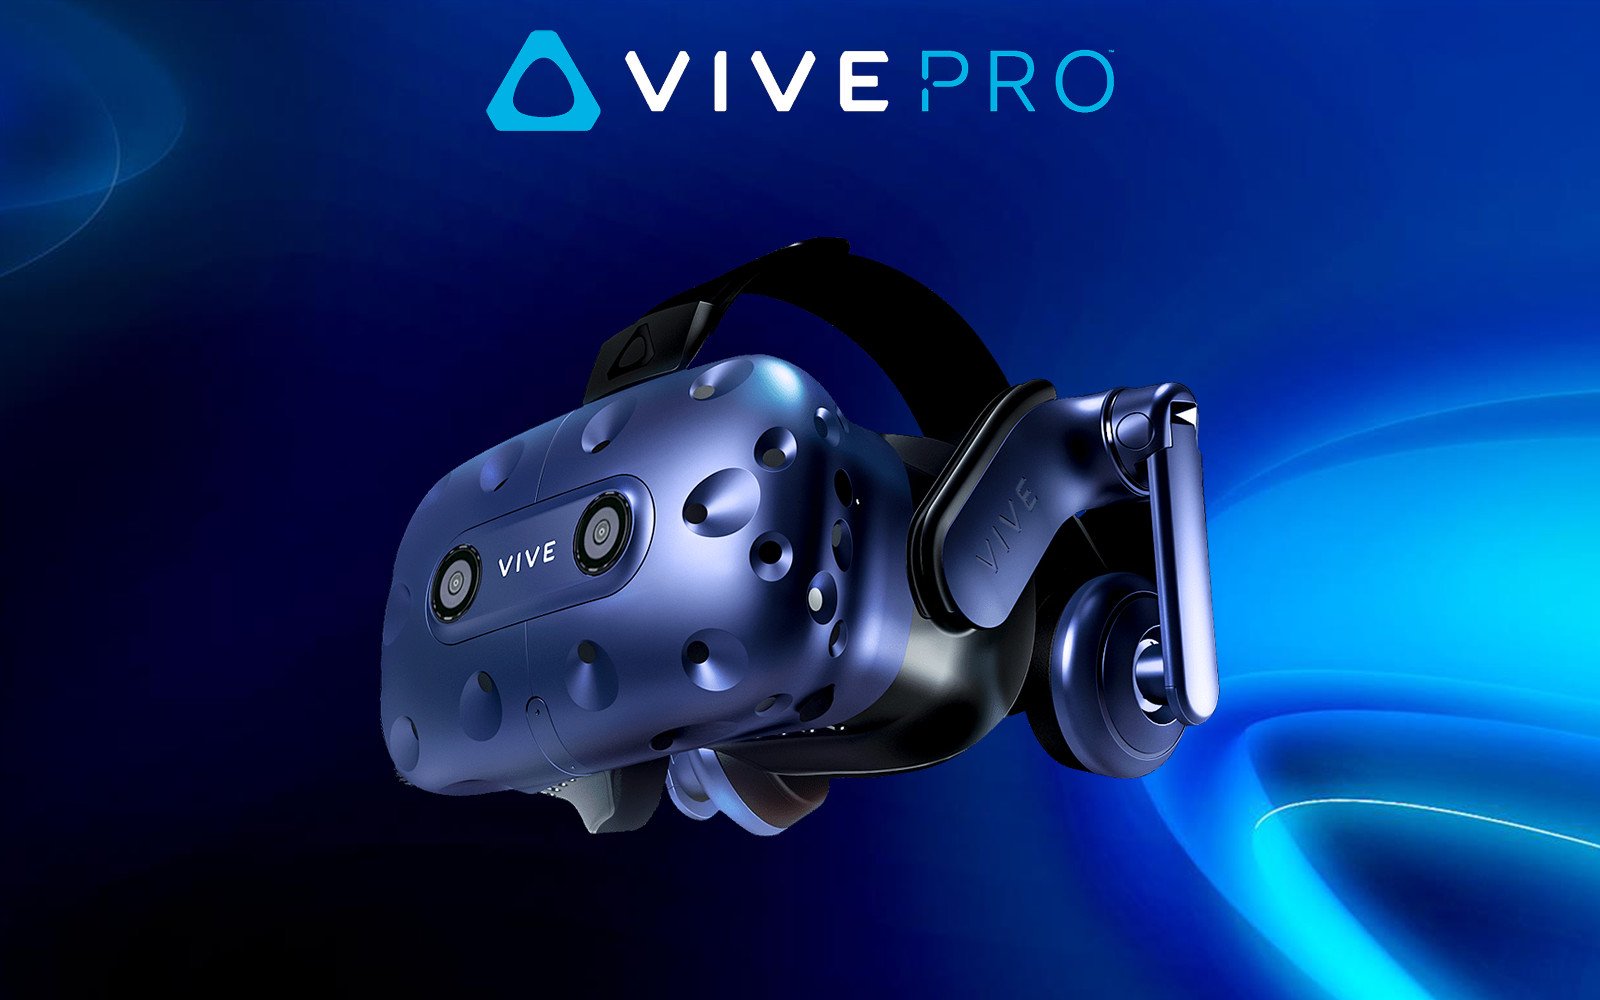 Vive Pro's increased resolution doesn't quite eliminate screen door effect, but it's a great improvement